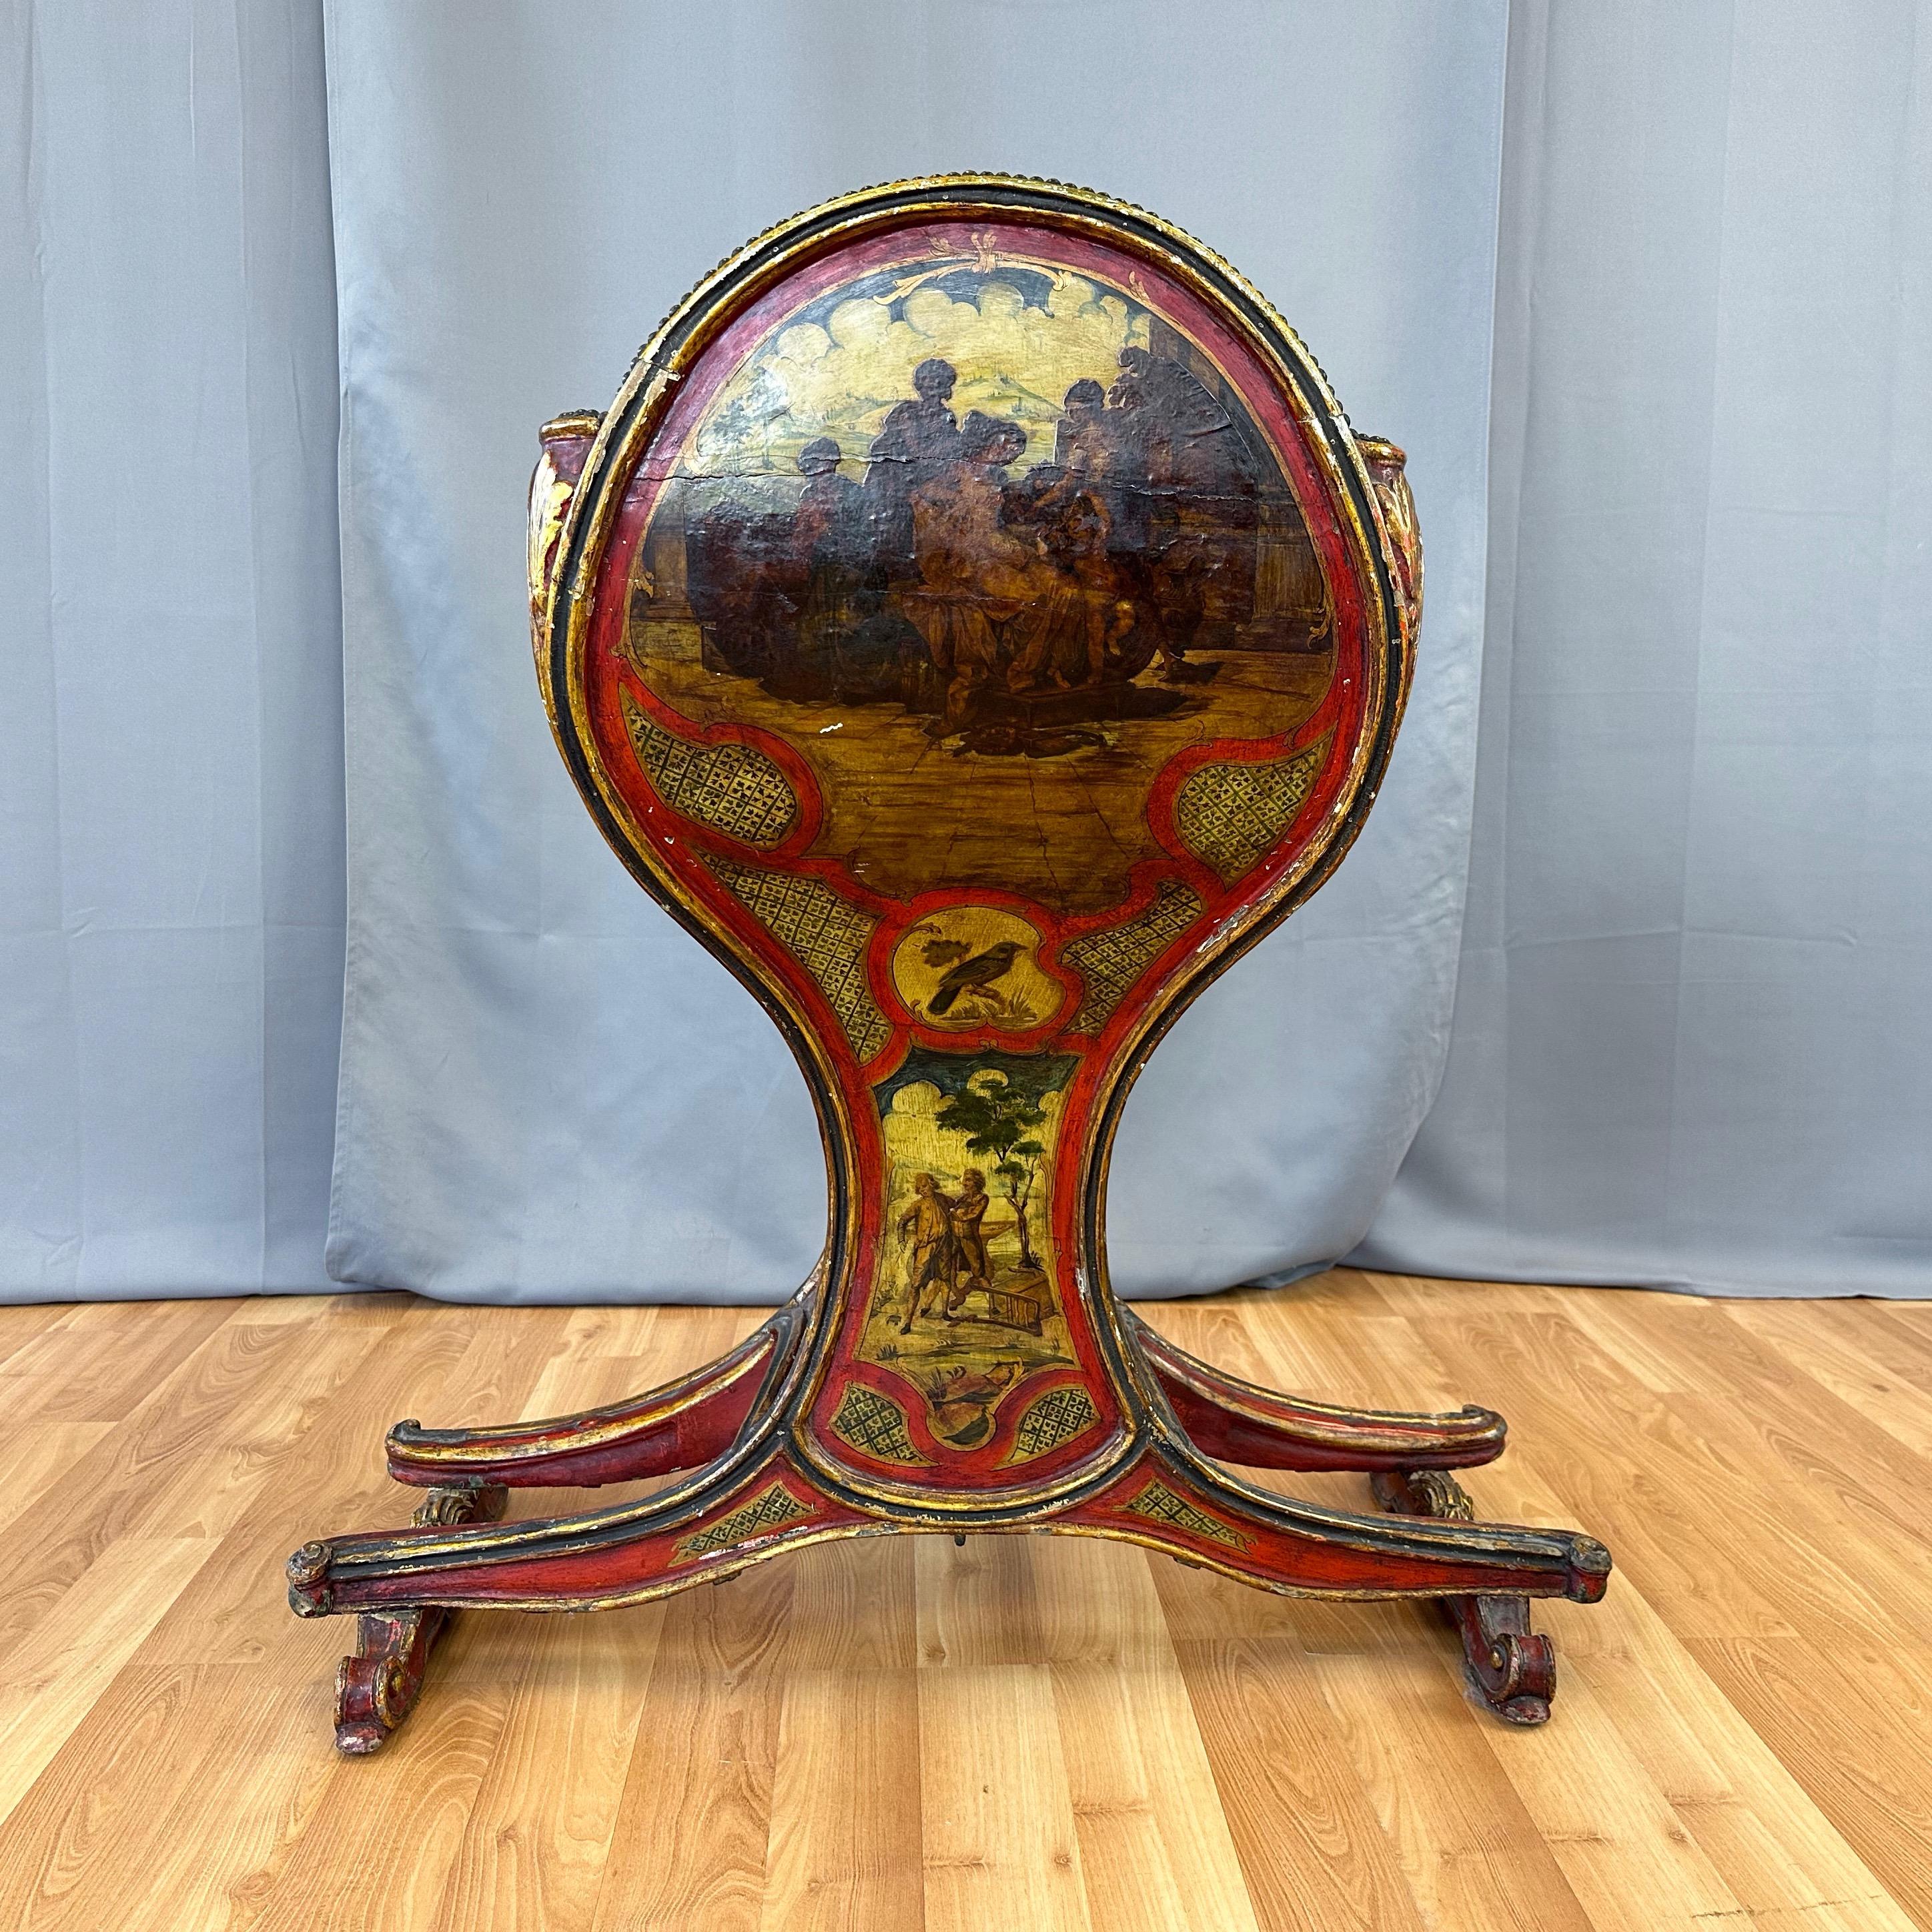 Venetian Illustrated, Polychrome, Gilt, and Leather Gondola Chair, c. 1820 In Good Condition For Sale In San Francisco, CA